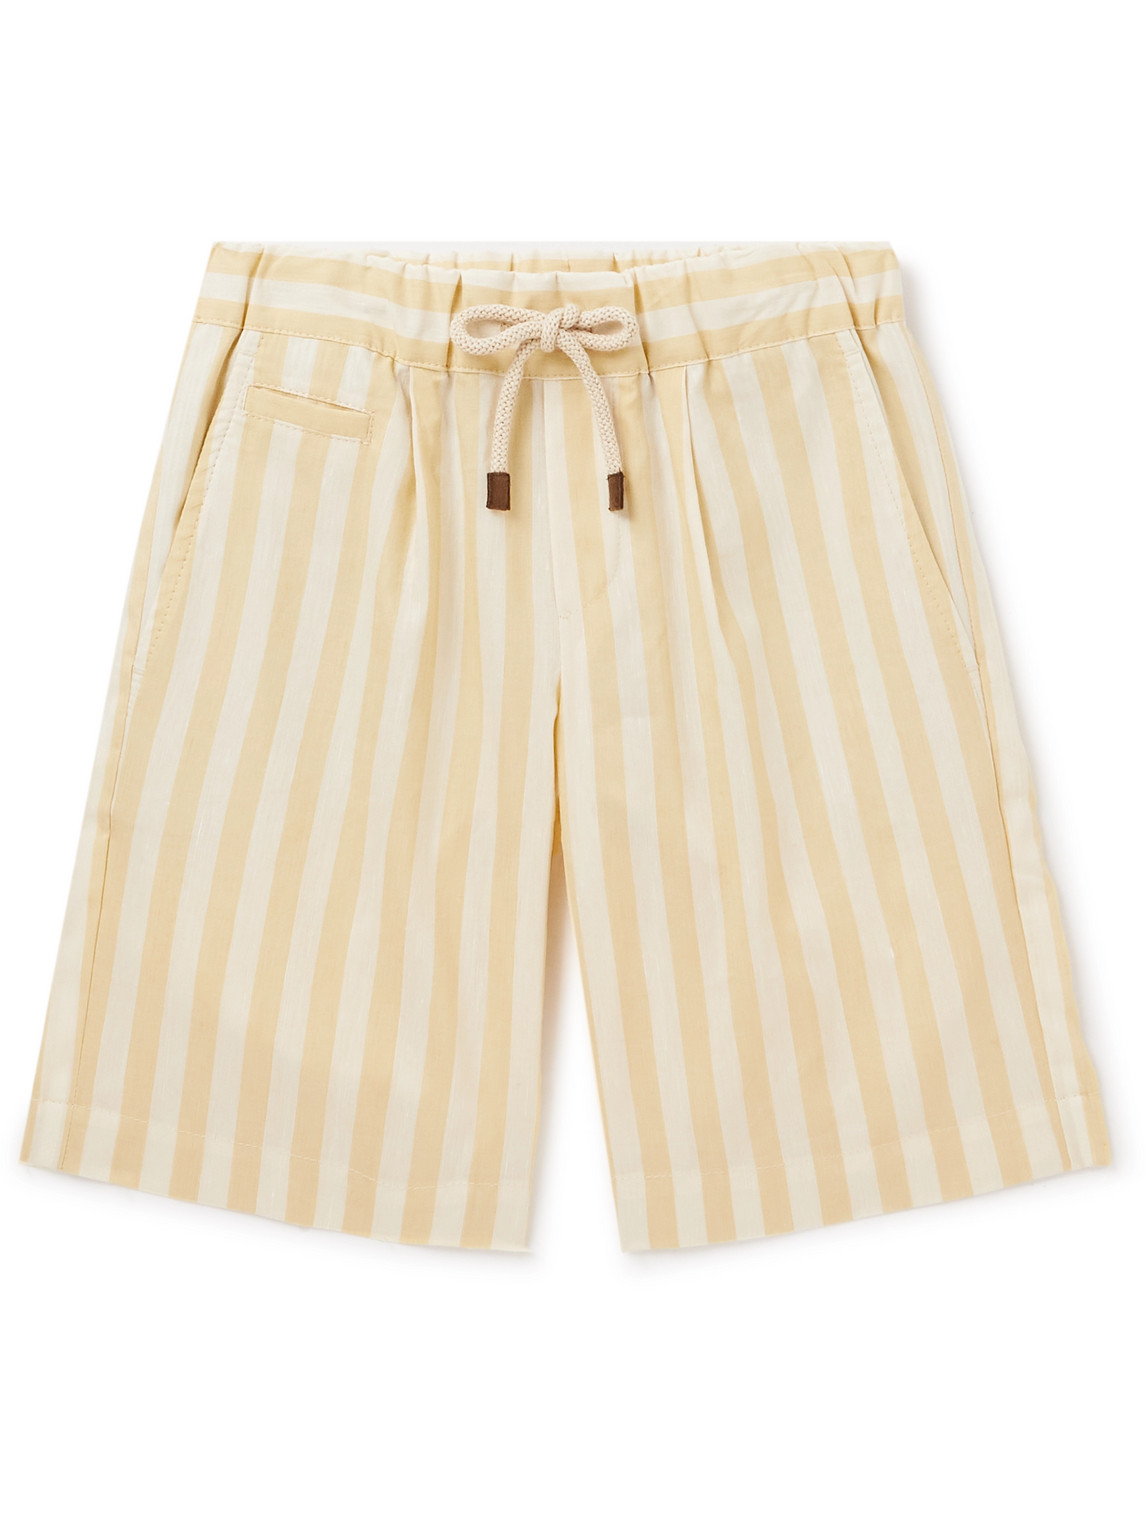 Ages 8-11 Striped Cotton and Linen-Blend Shorts